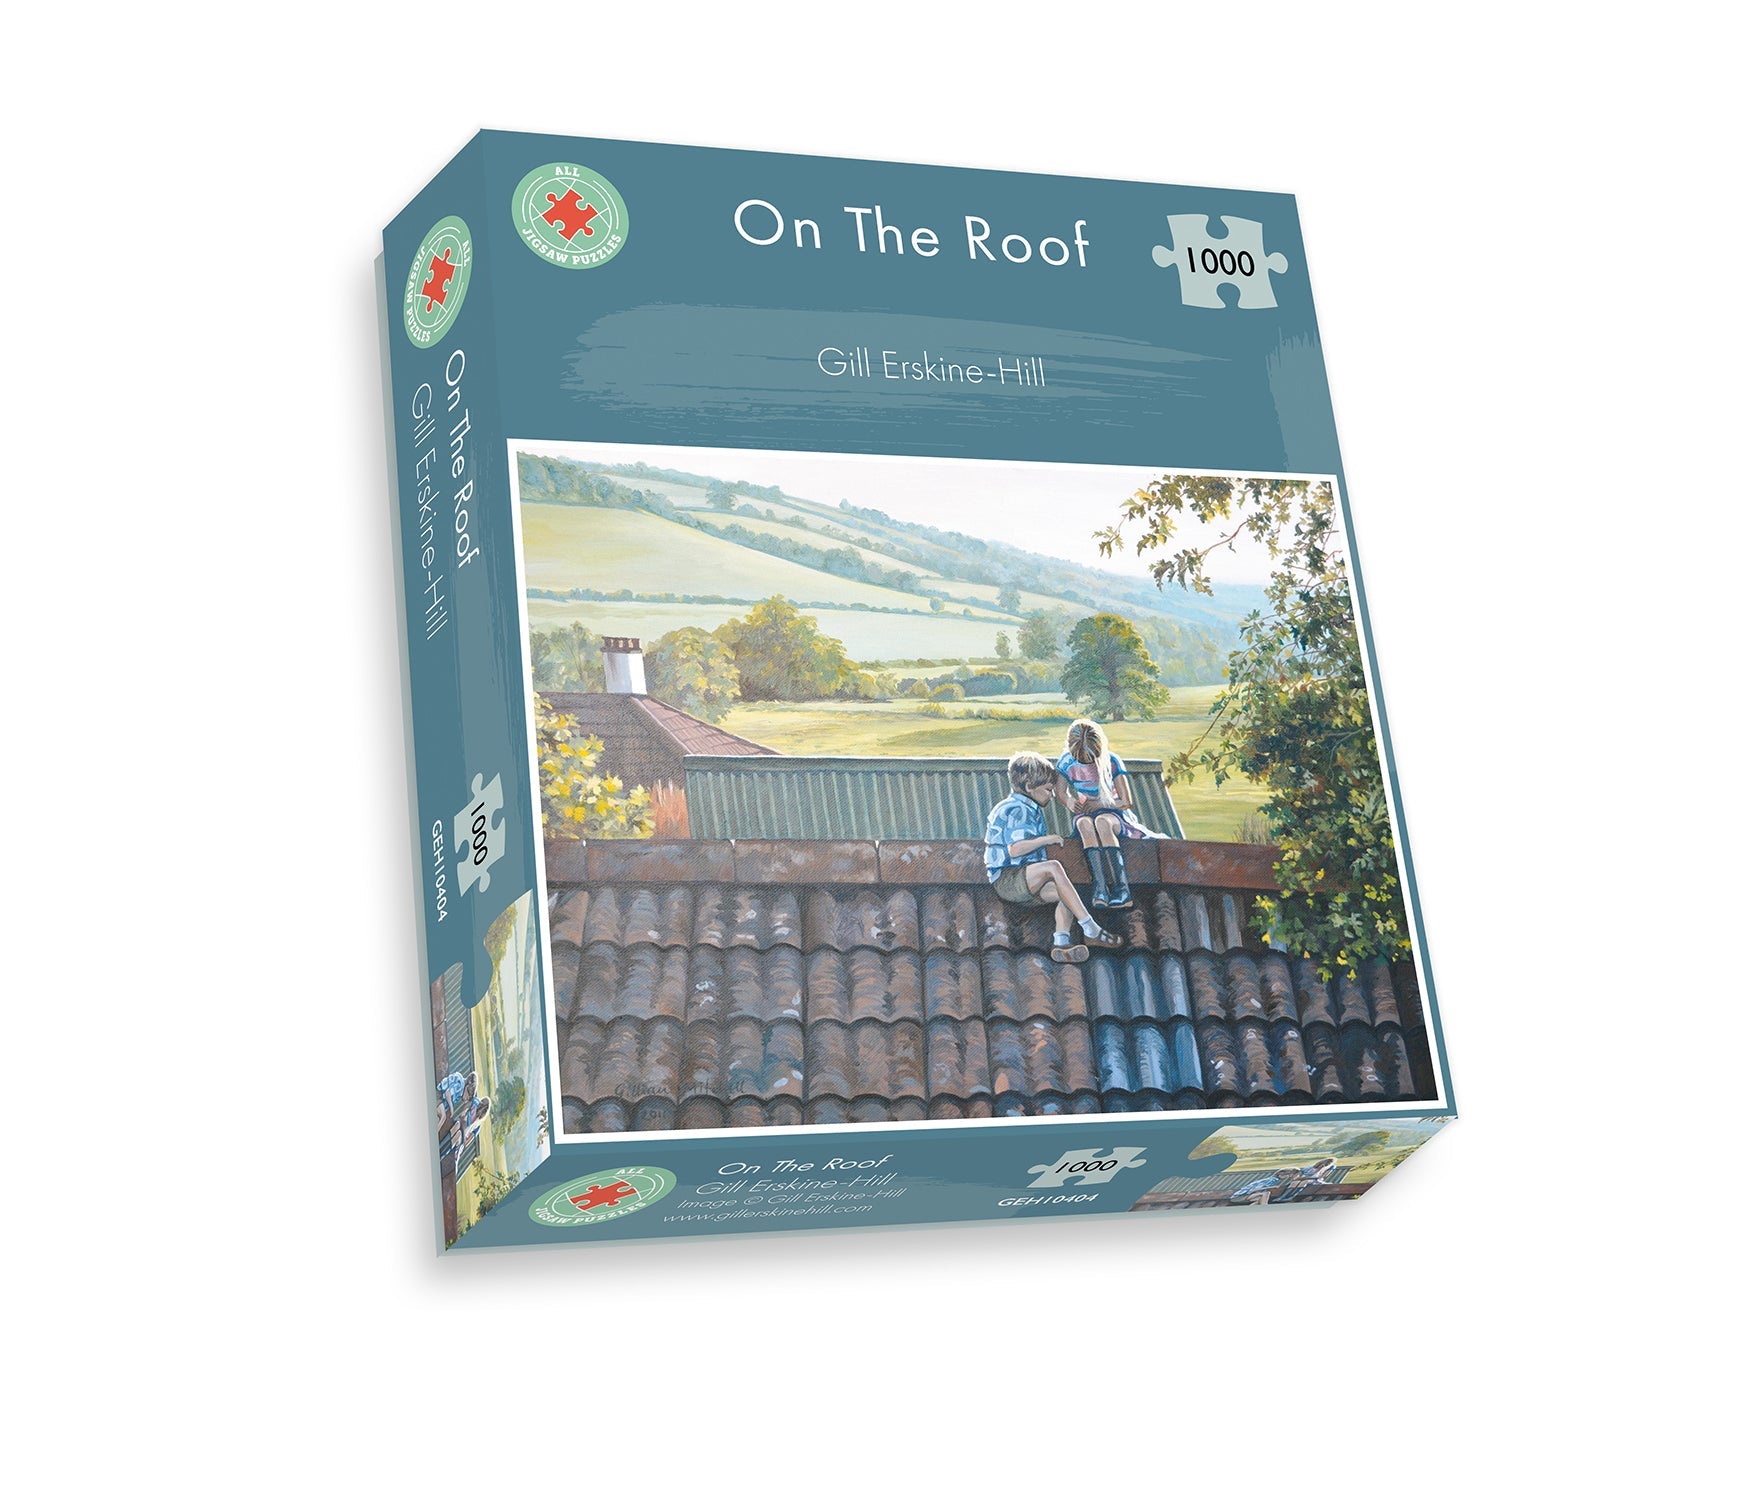 On The Roof - 1000 Piece Jigsaw Puzzle box